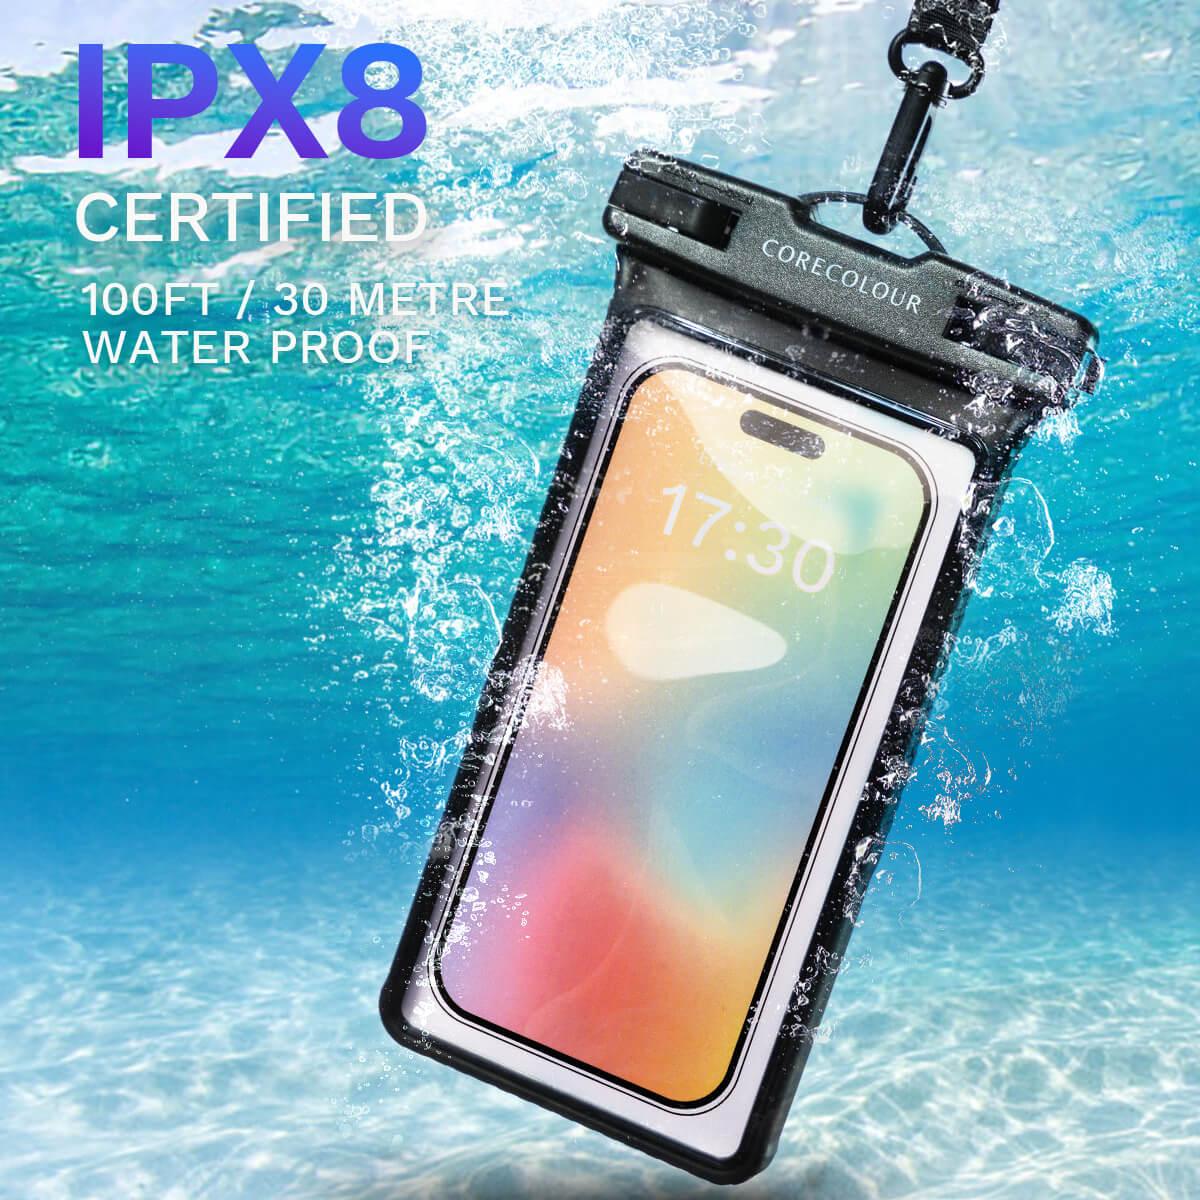 Blue IPX8 Certified Water Proof Bag with Lanyard - CORECOLOUR AU